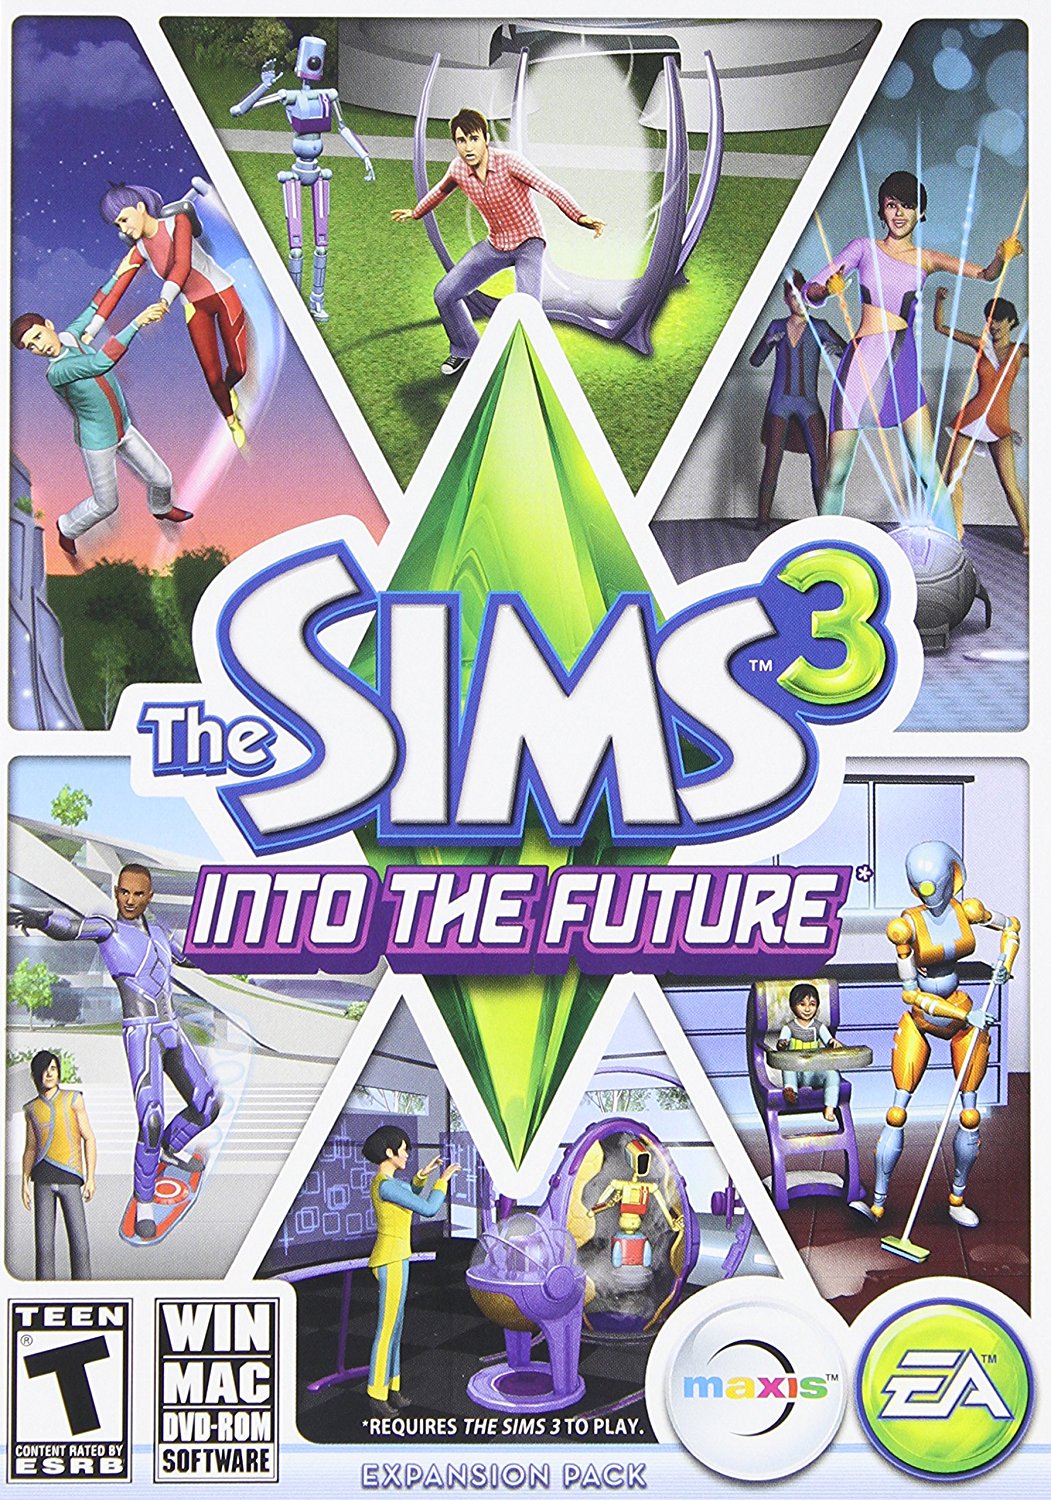 Ea The Sims 3 Into The Future - Simulation Game Retail - Dvd-rom - Mac, Pc (73089) - image 4 of 5